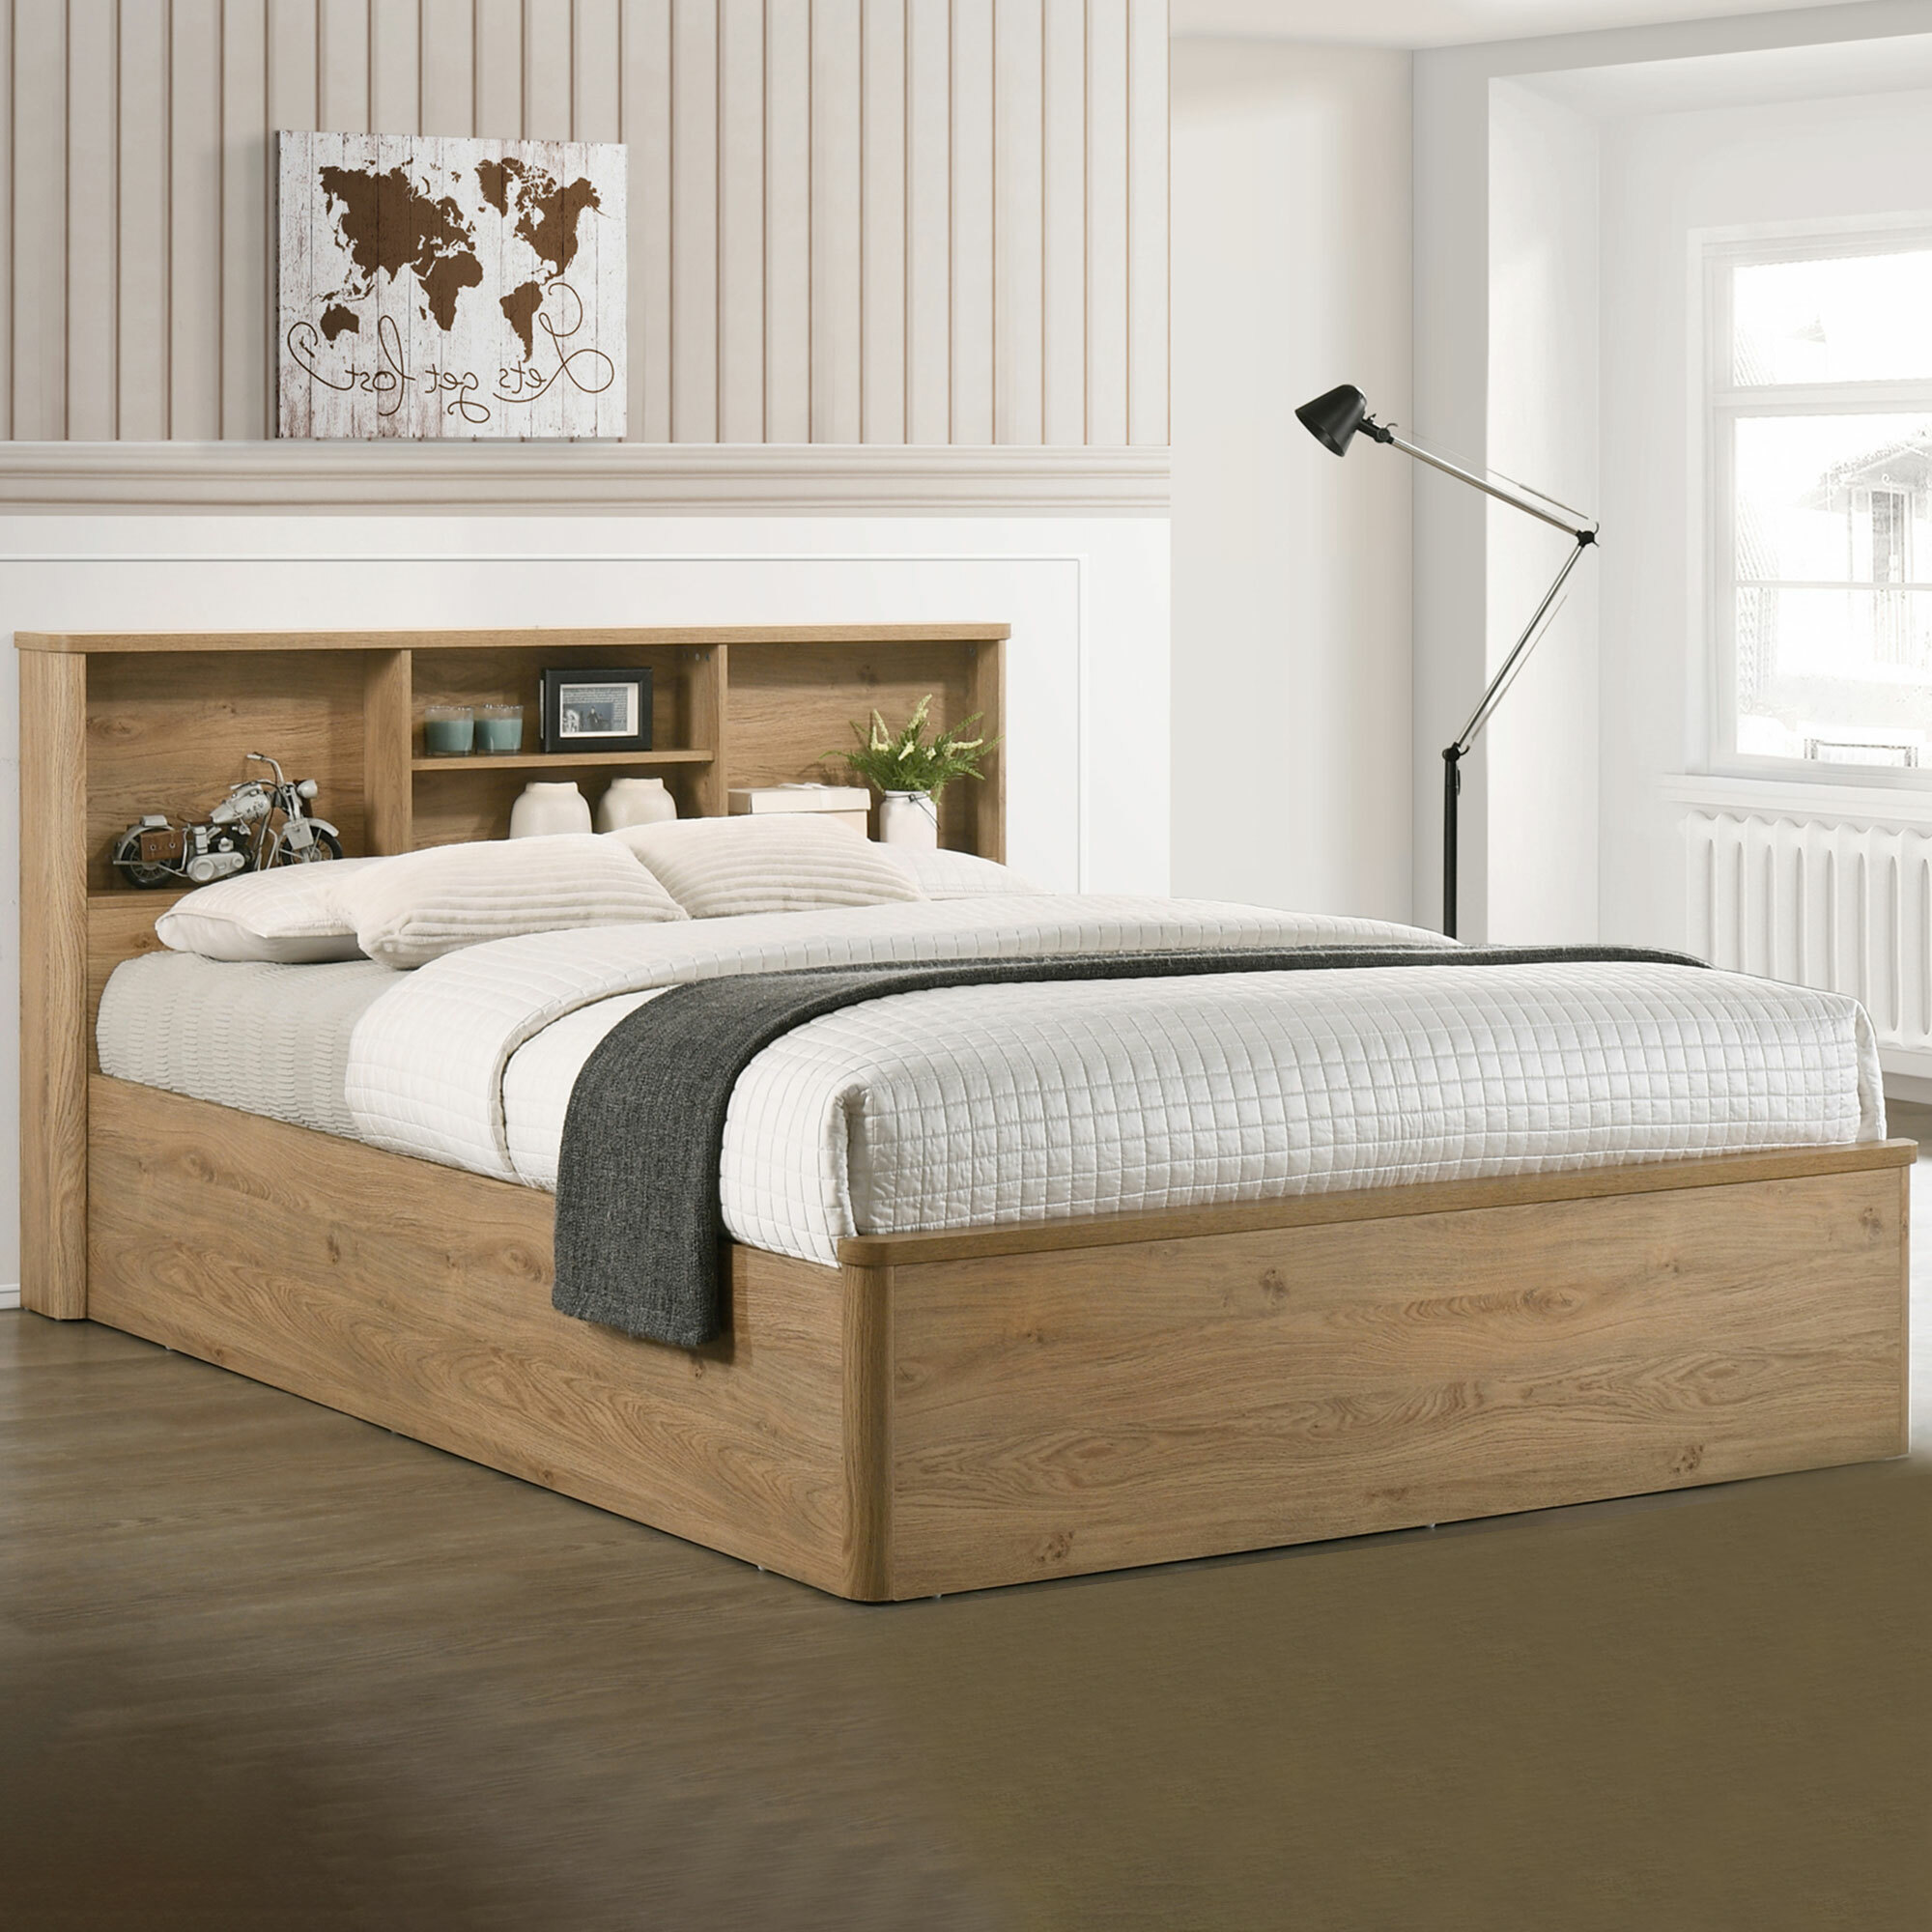 Core Living Natural Anderson Queen Bed, Wooden Bunk Beds With Bookcase Headboards